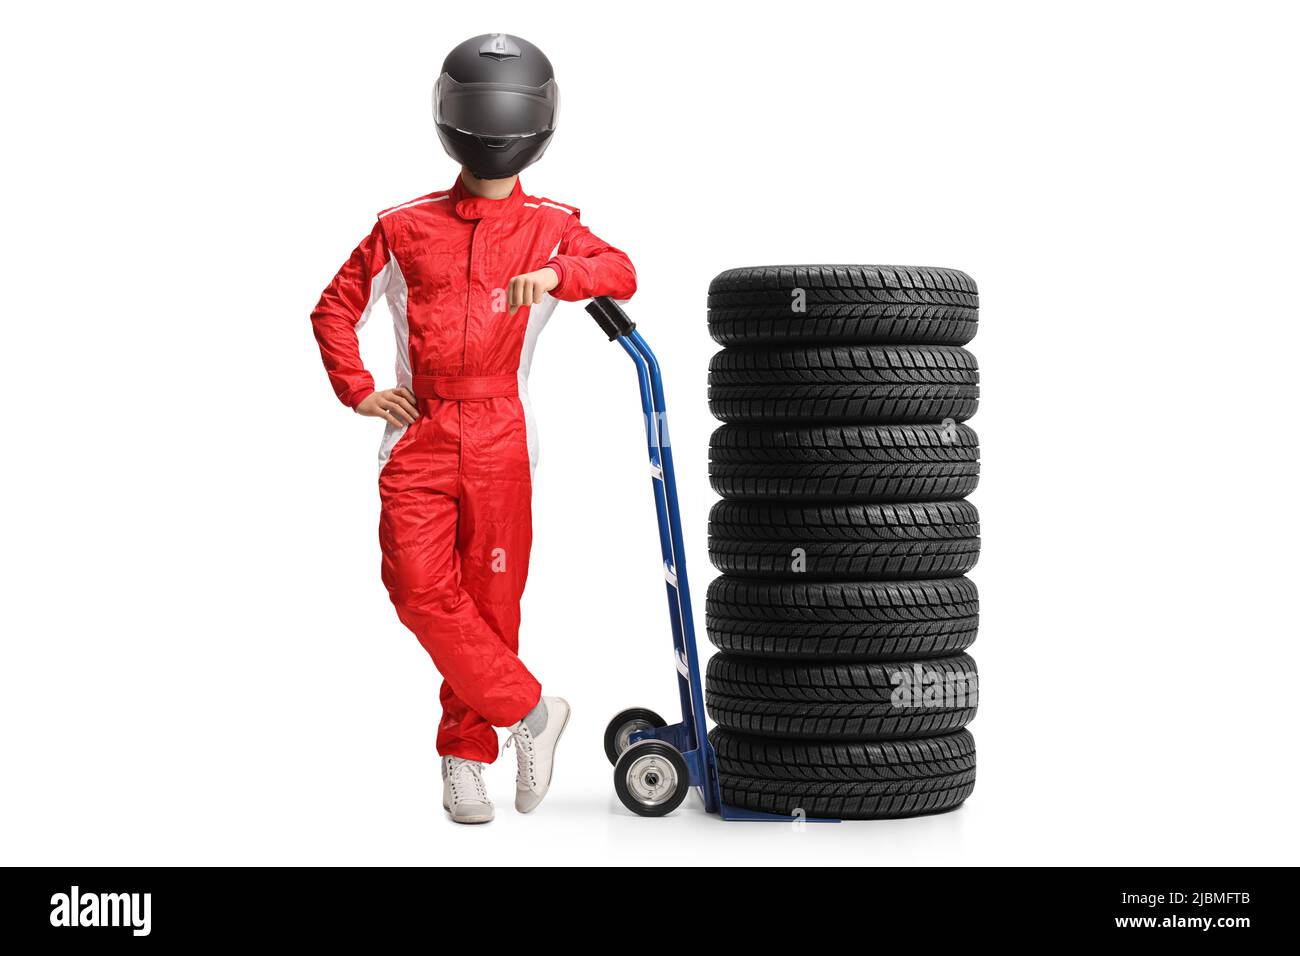 Full length portrait of a racer with a helmet and suit leaning on a hand truck with tires isolated on white background Stock Photo